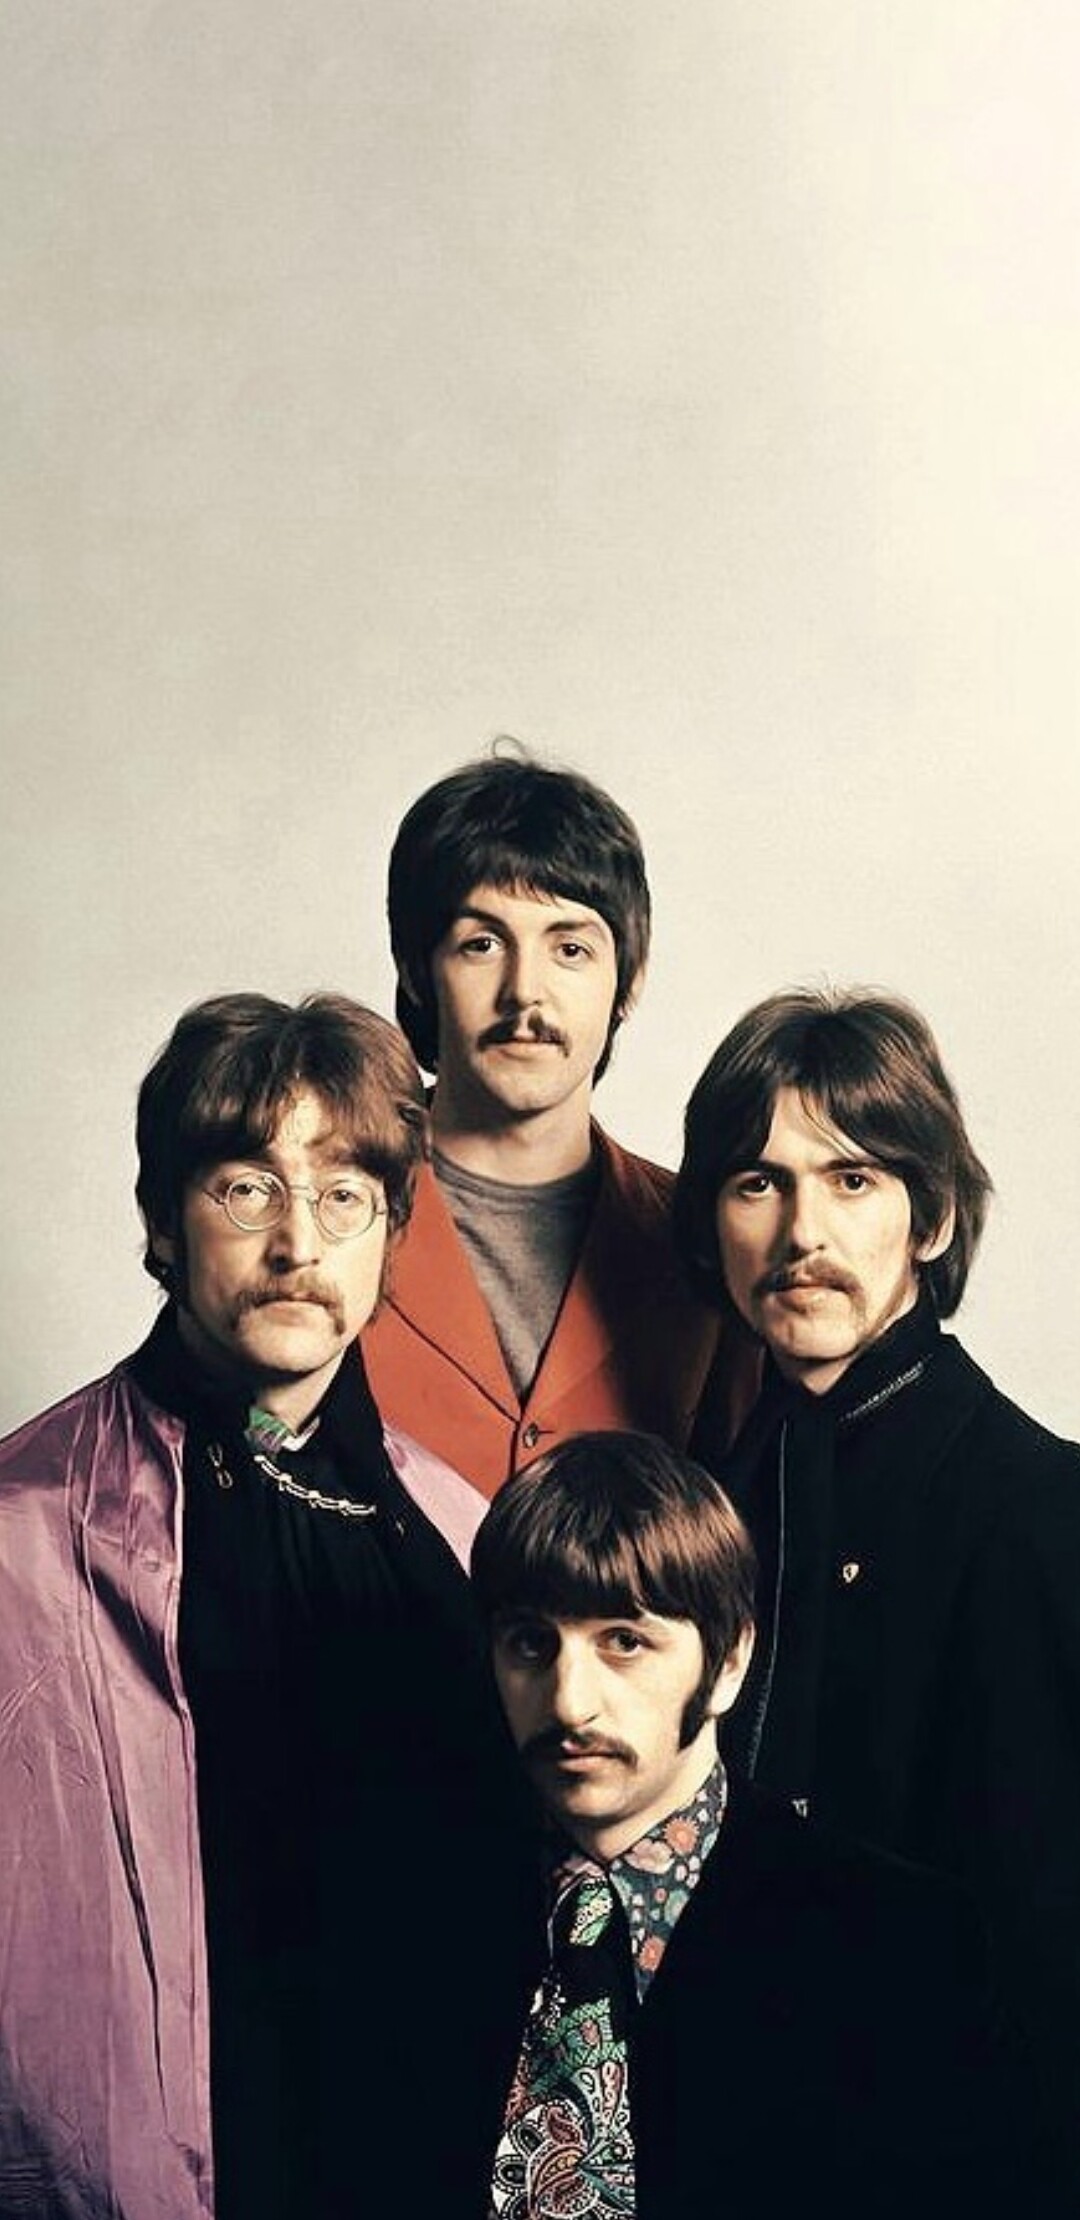 The Beatles: Sgt. Pepper's Lonely Hearts Club Band became their eighth studio album. 1080x2220 HD Background.